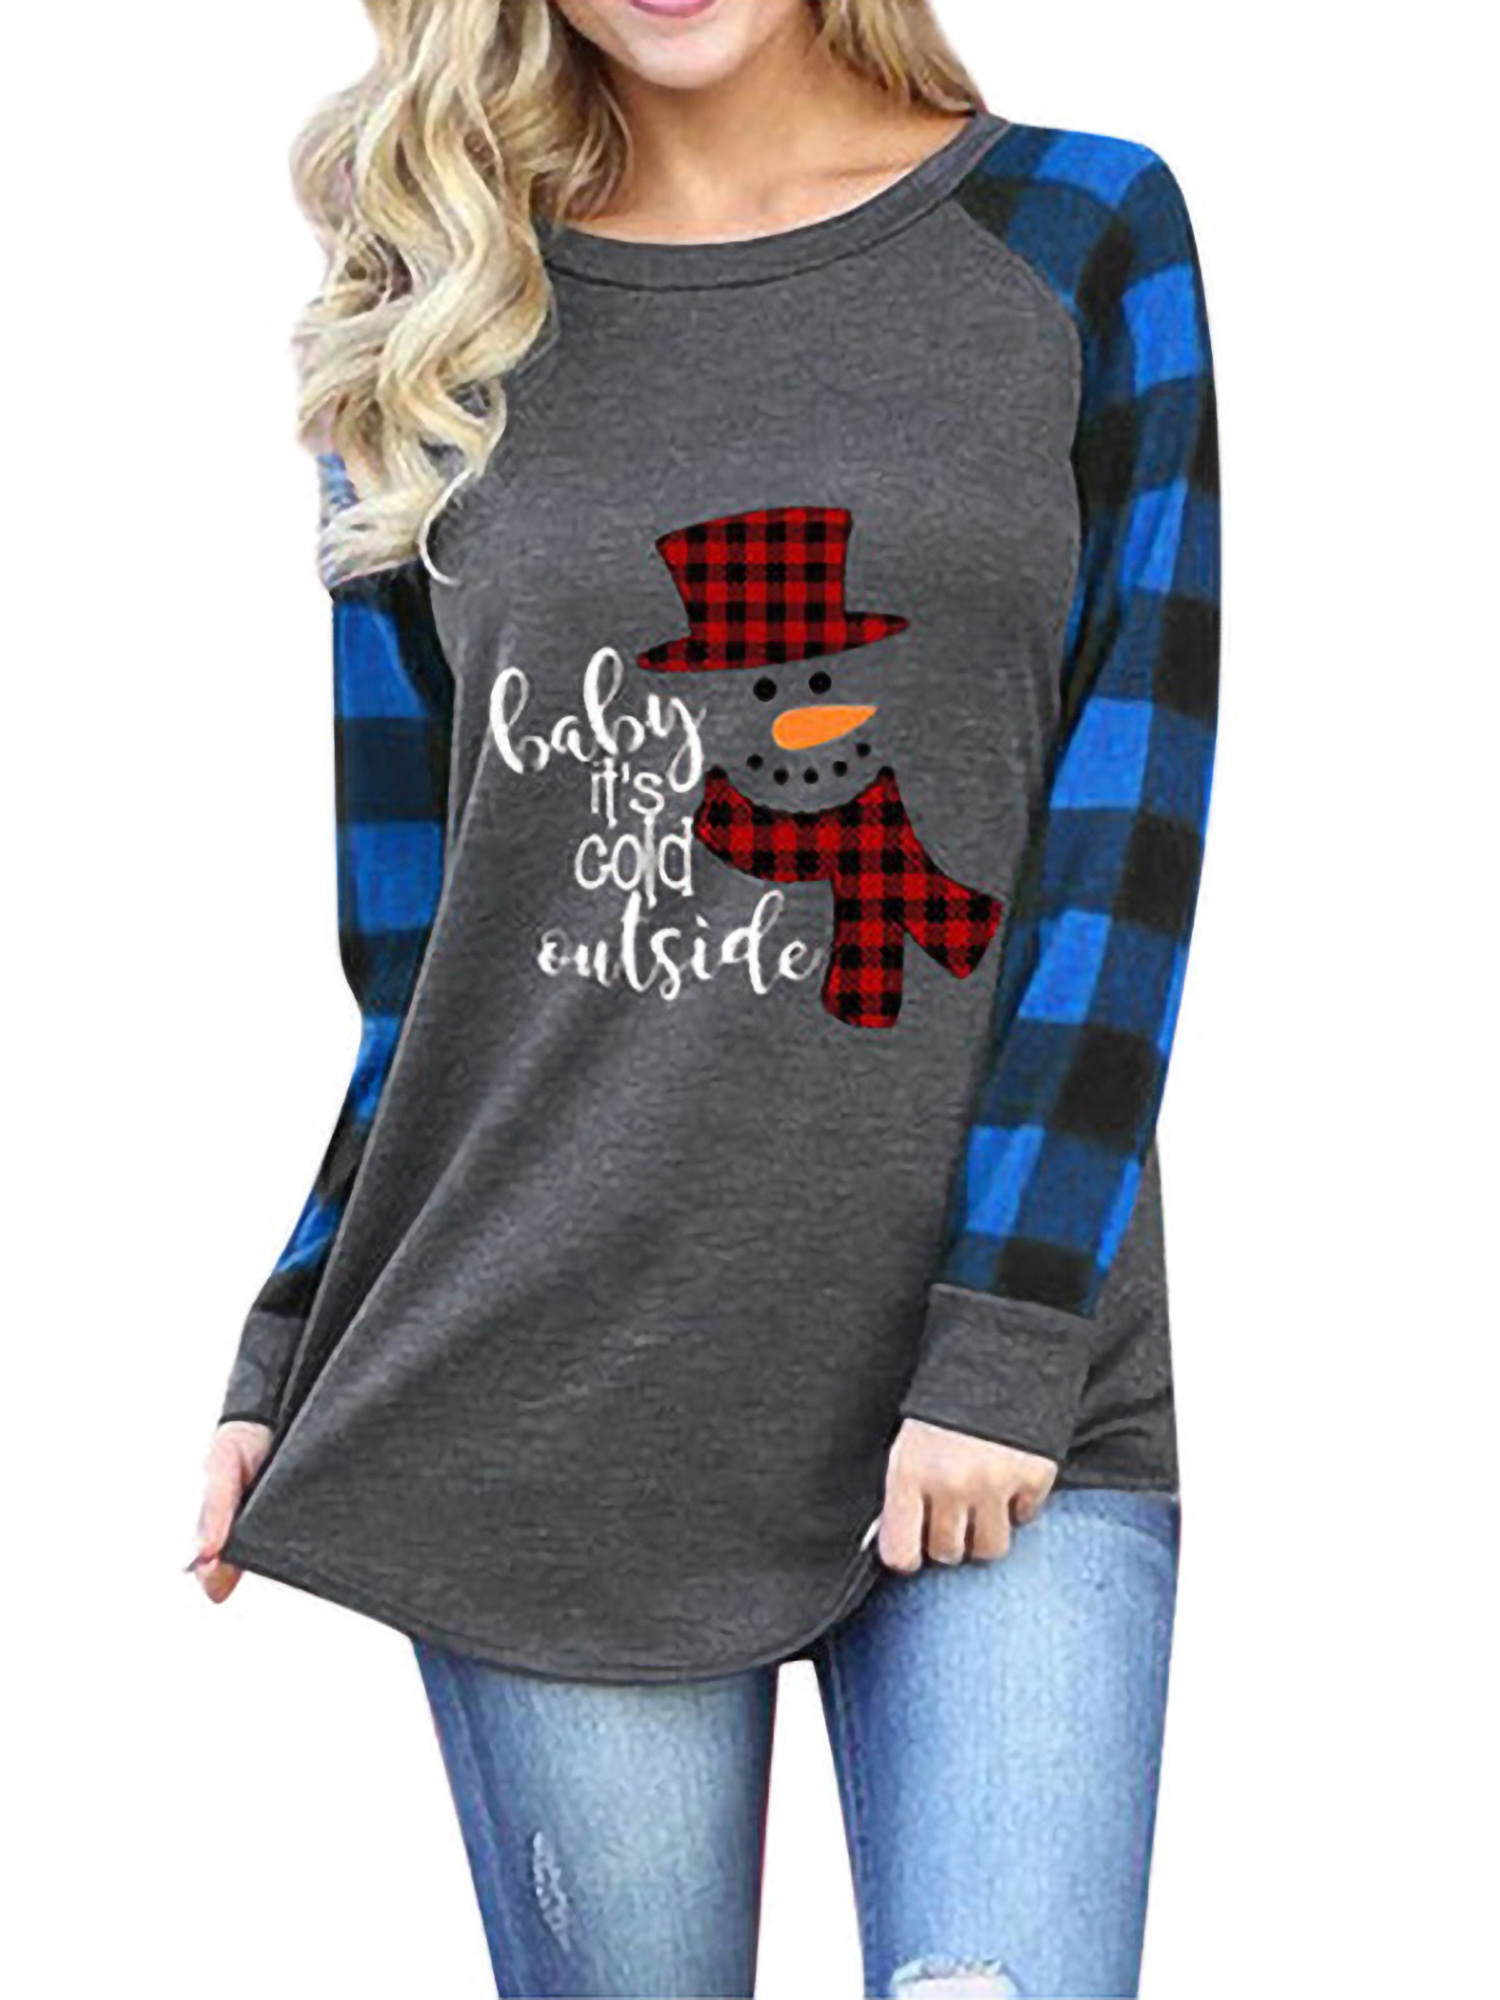 Tunic Tops for Leggings for Women Long Sleeve Merry Christmas Plaid Printed Tops Blouses Pullovers with Pockets